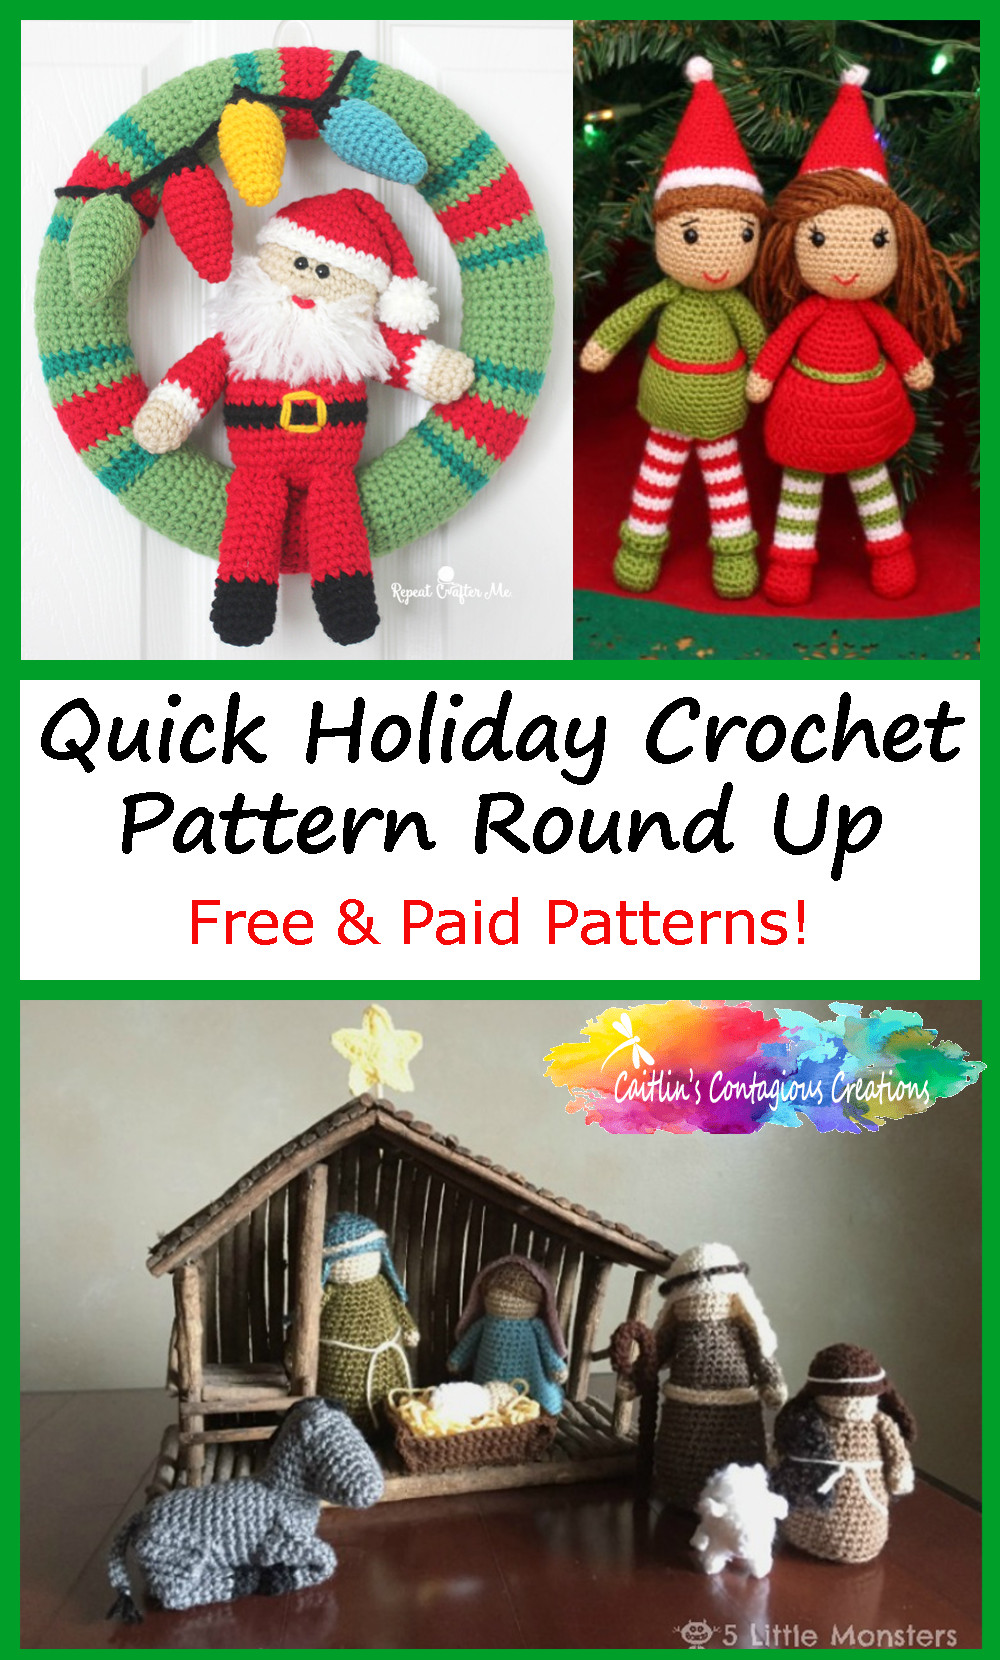 Quick Holiday Crochet Pattern Round Up free and paid patterns for all skill levels